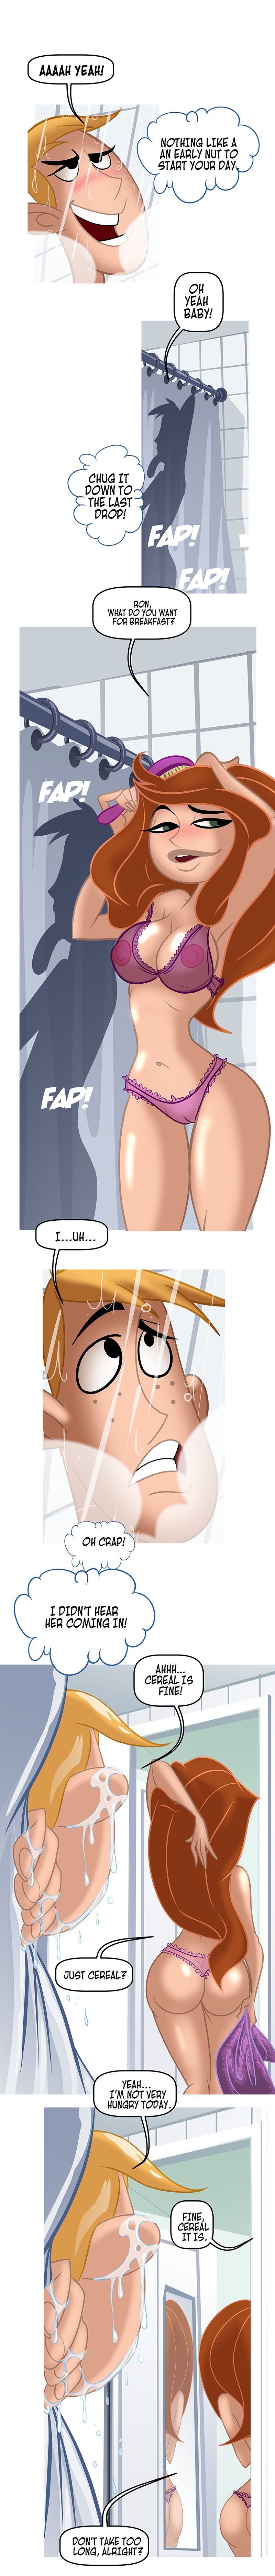 Day Dreaming By Tease Comix Porn Comic english 09